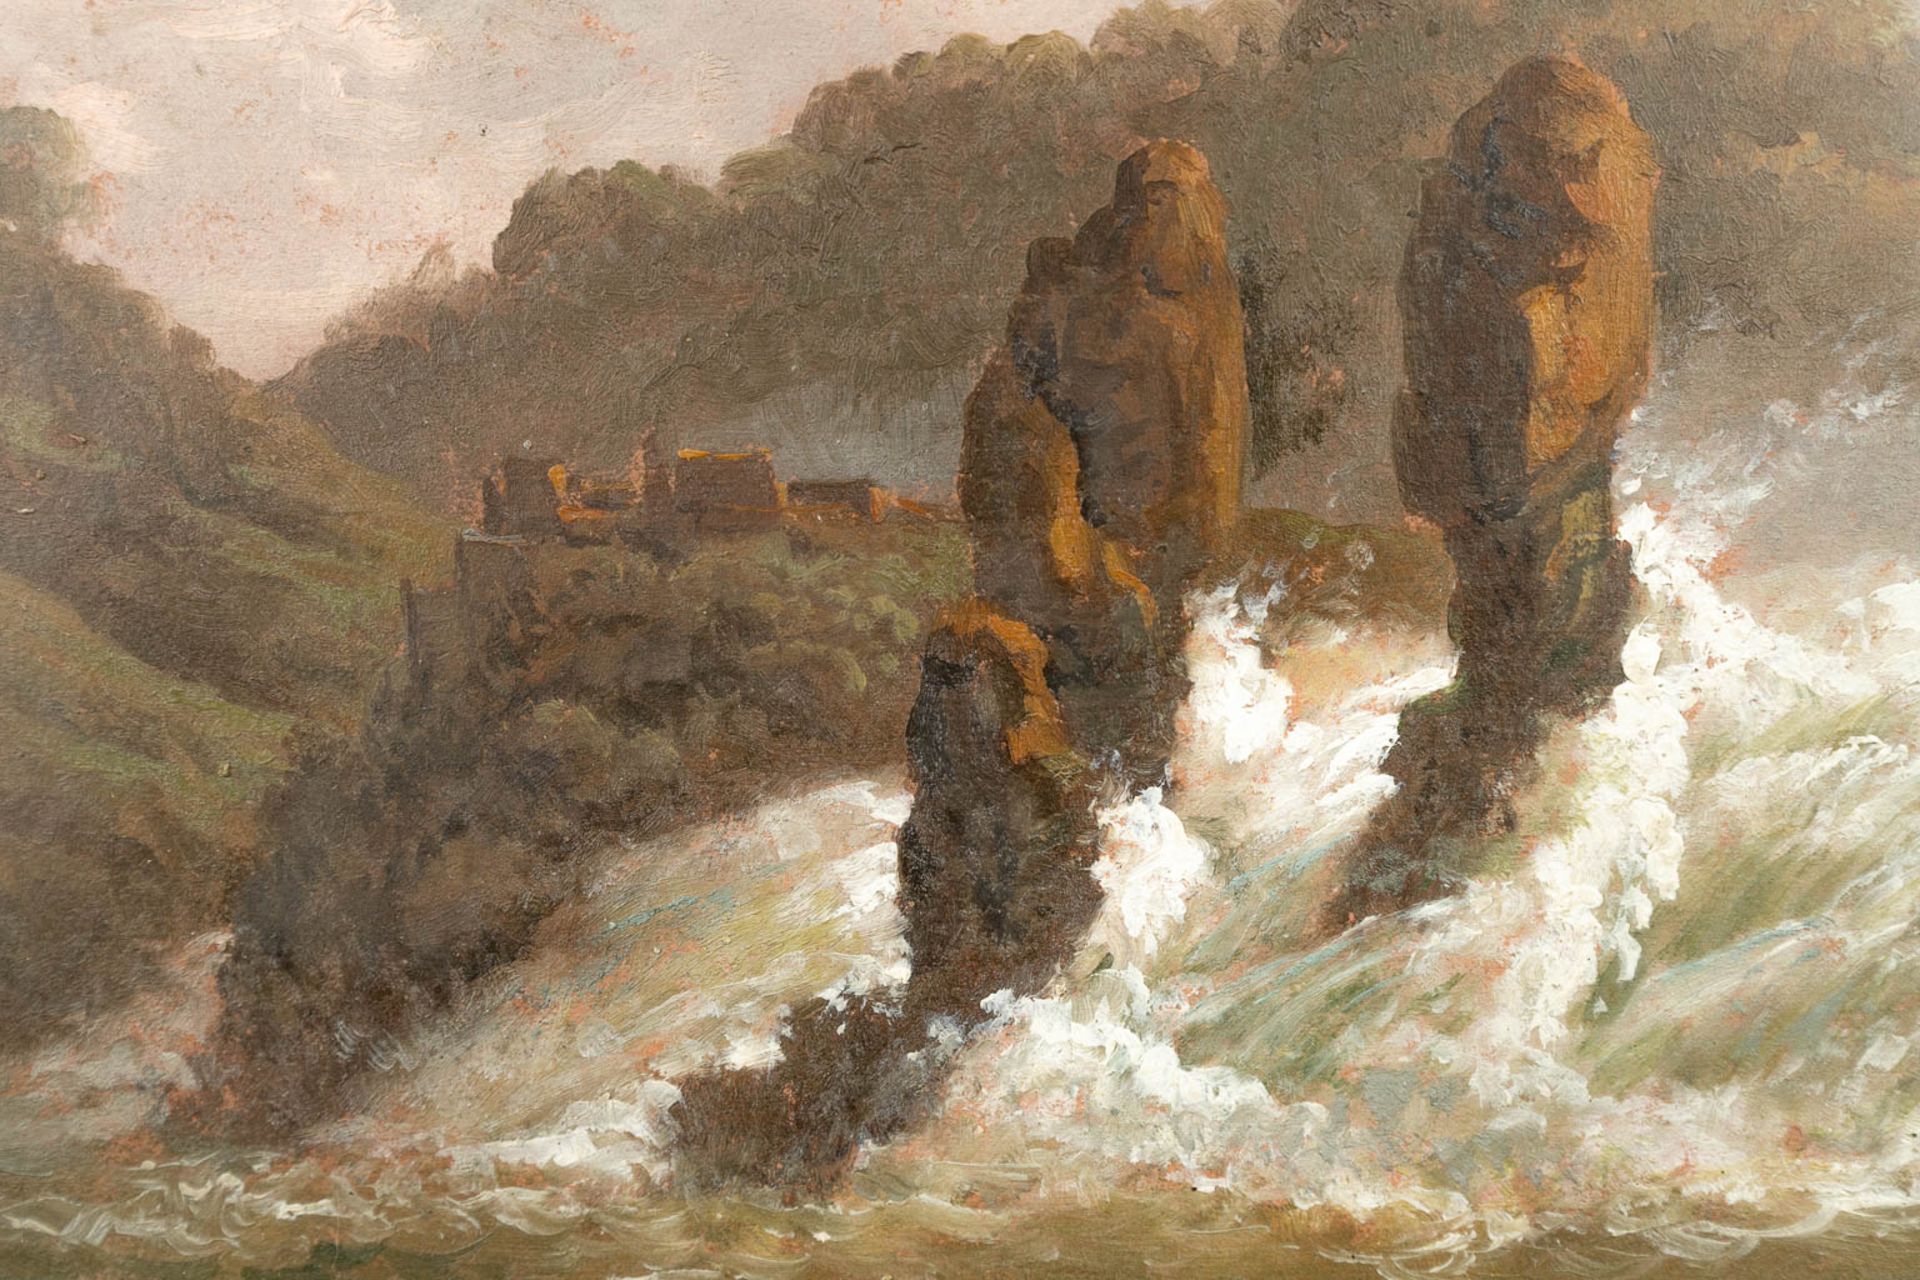 Henri VAN ASSCHE (1774-1841) 'The Waterfall' a painting, oil on paper. (26 x 20 cm) - Image 5 of 7